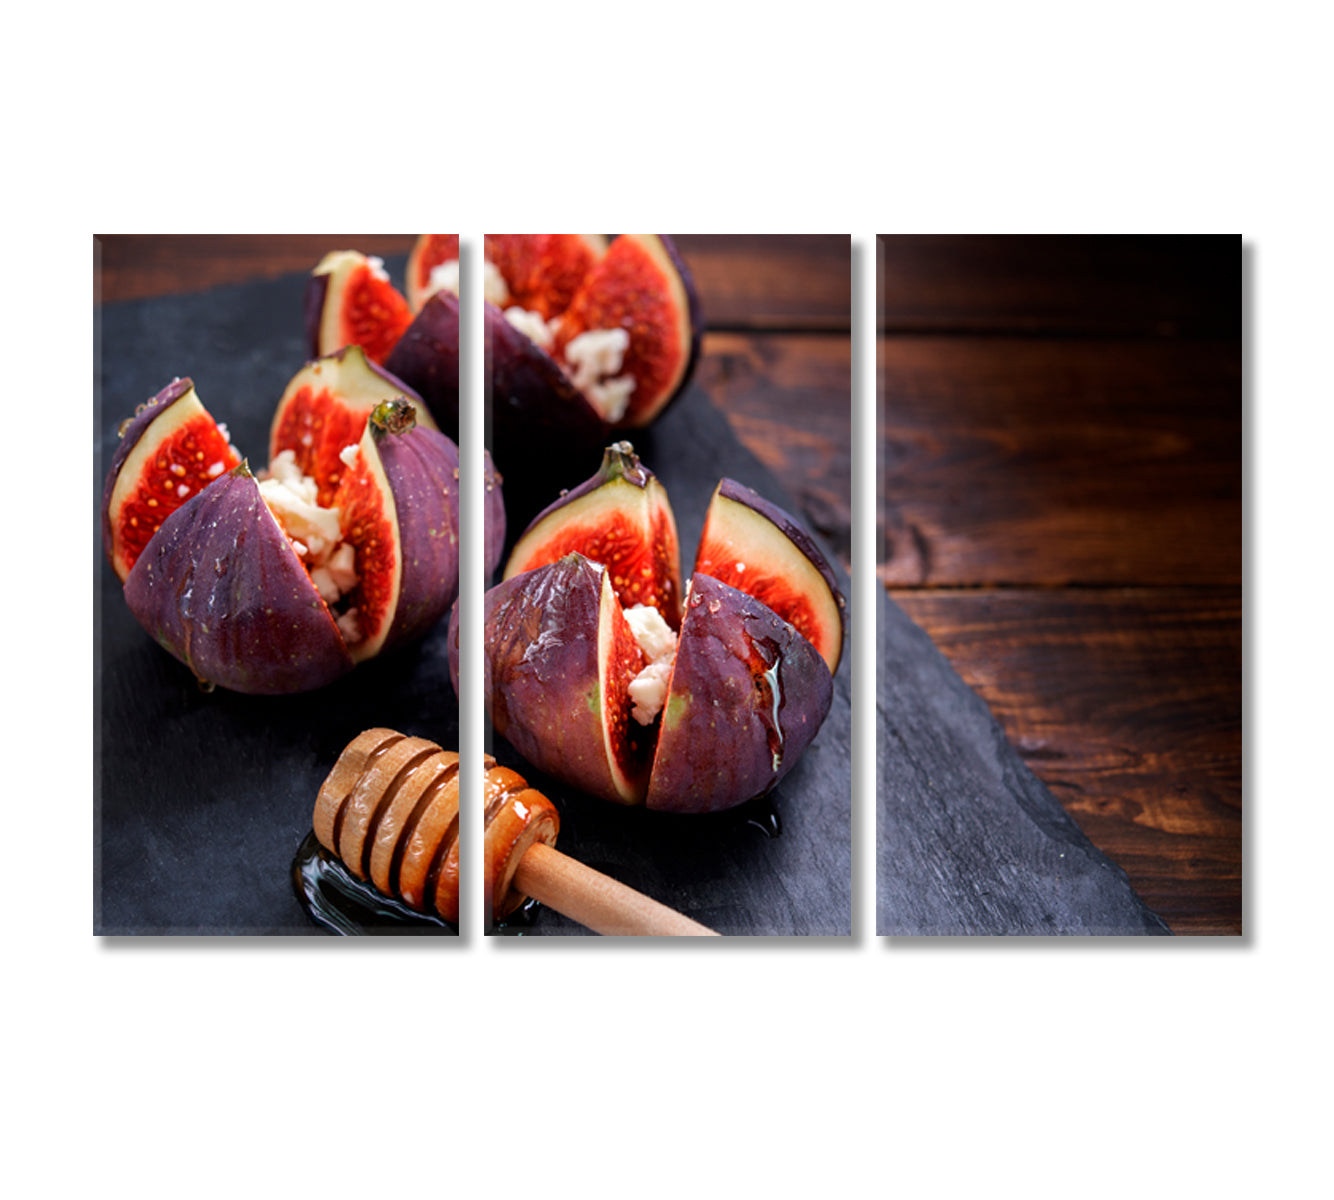 Figs with Cheese and Honey Canvas Print-Canvas Print-CetArt-3 Panels-36x24 inches-CetArt